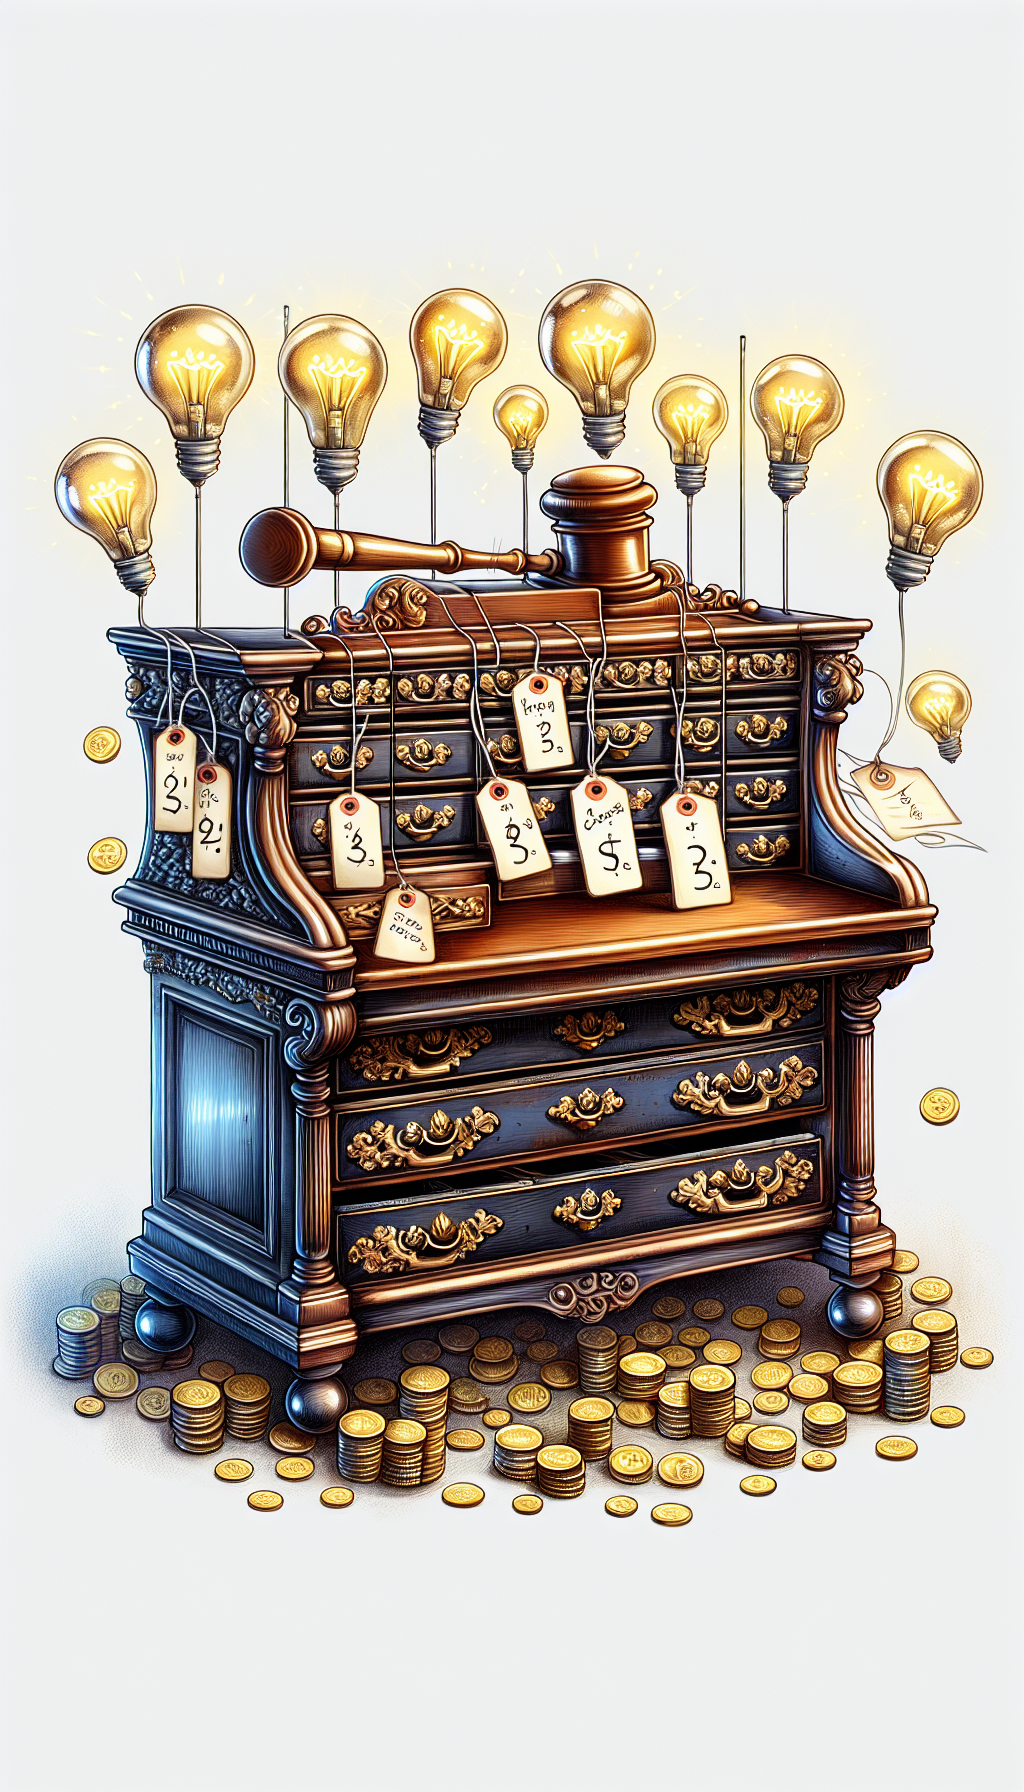 An elegant hand-painted illustration depicts a gleaming antique secretary desk with price tags hanging from ornate pulls. Bursting from the desk's cubbies, cartoonish lightbulbs, each illustrating smart selling tips—photography, provenance, restoration—hover above. The desk sits on a platform of coins, subtly indicating rising value, with a gavel poised above, suggesting the excitement of an auction bid.